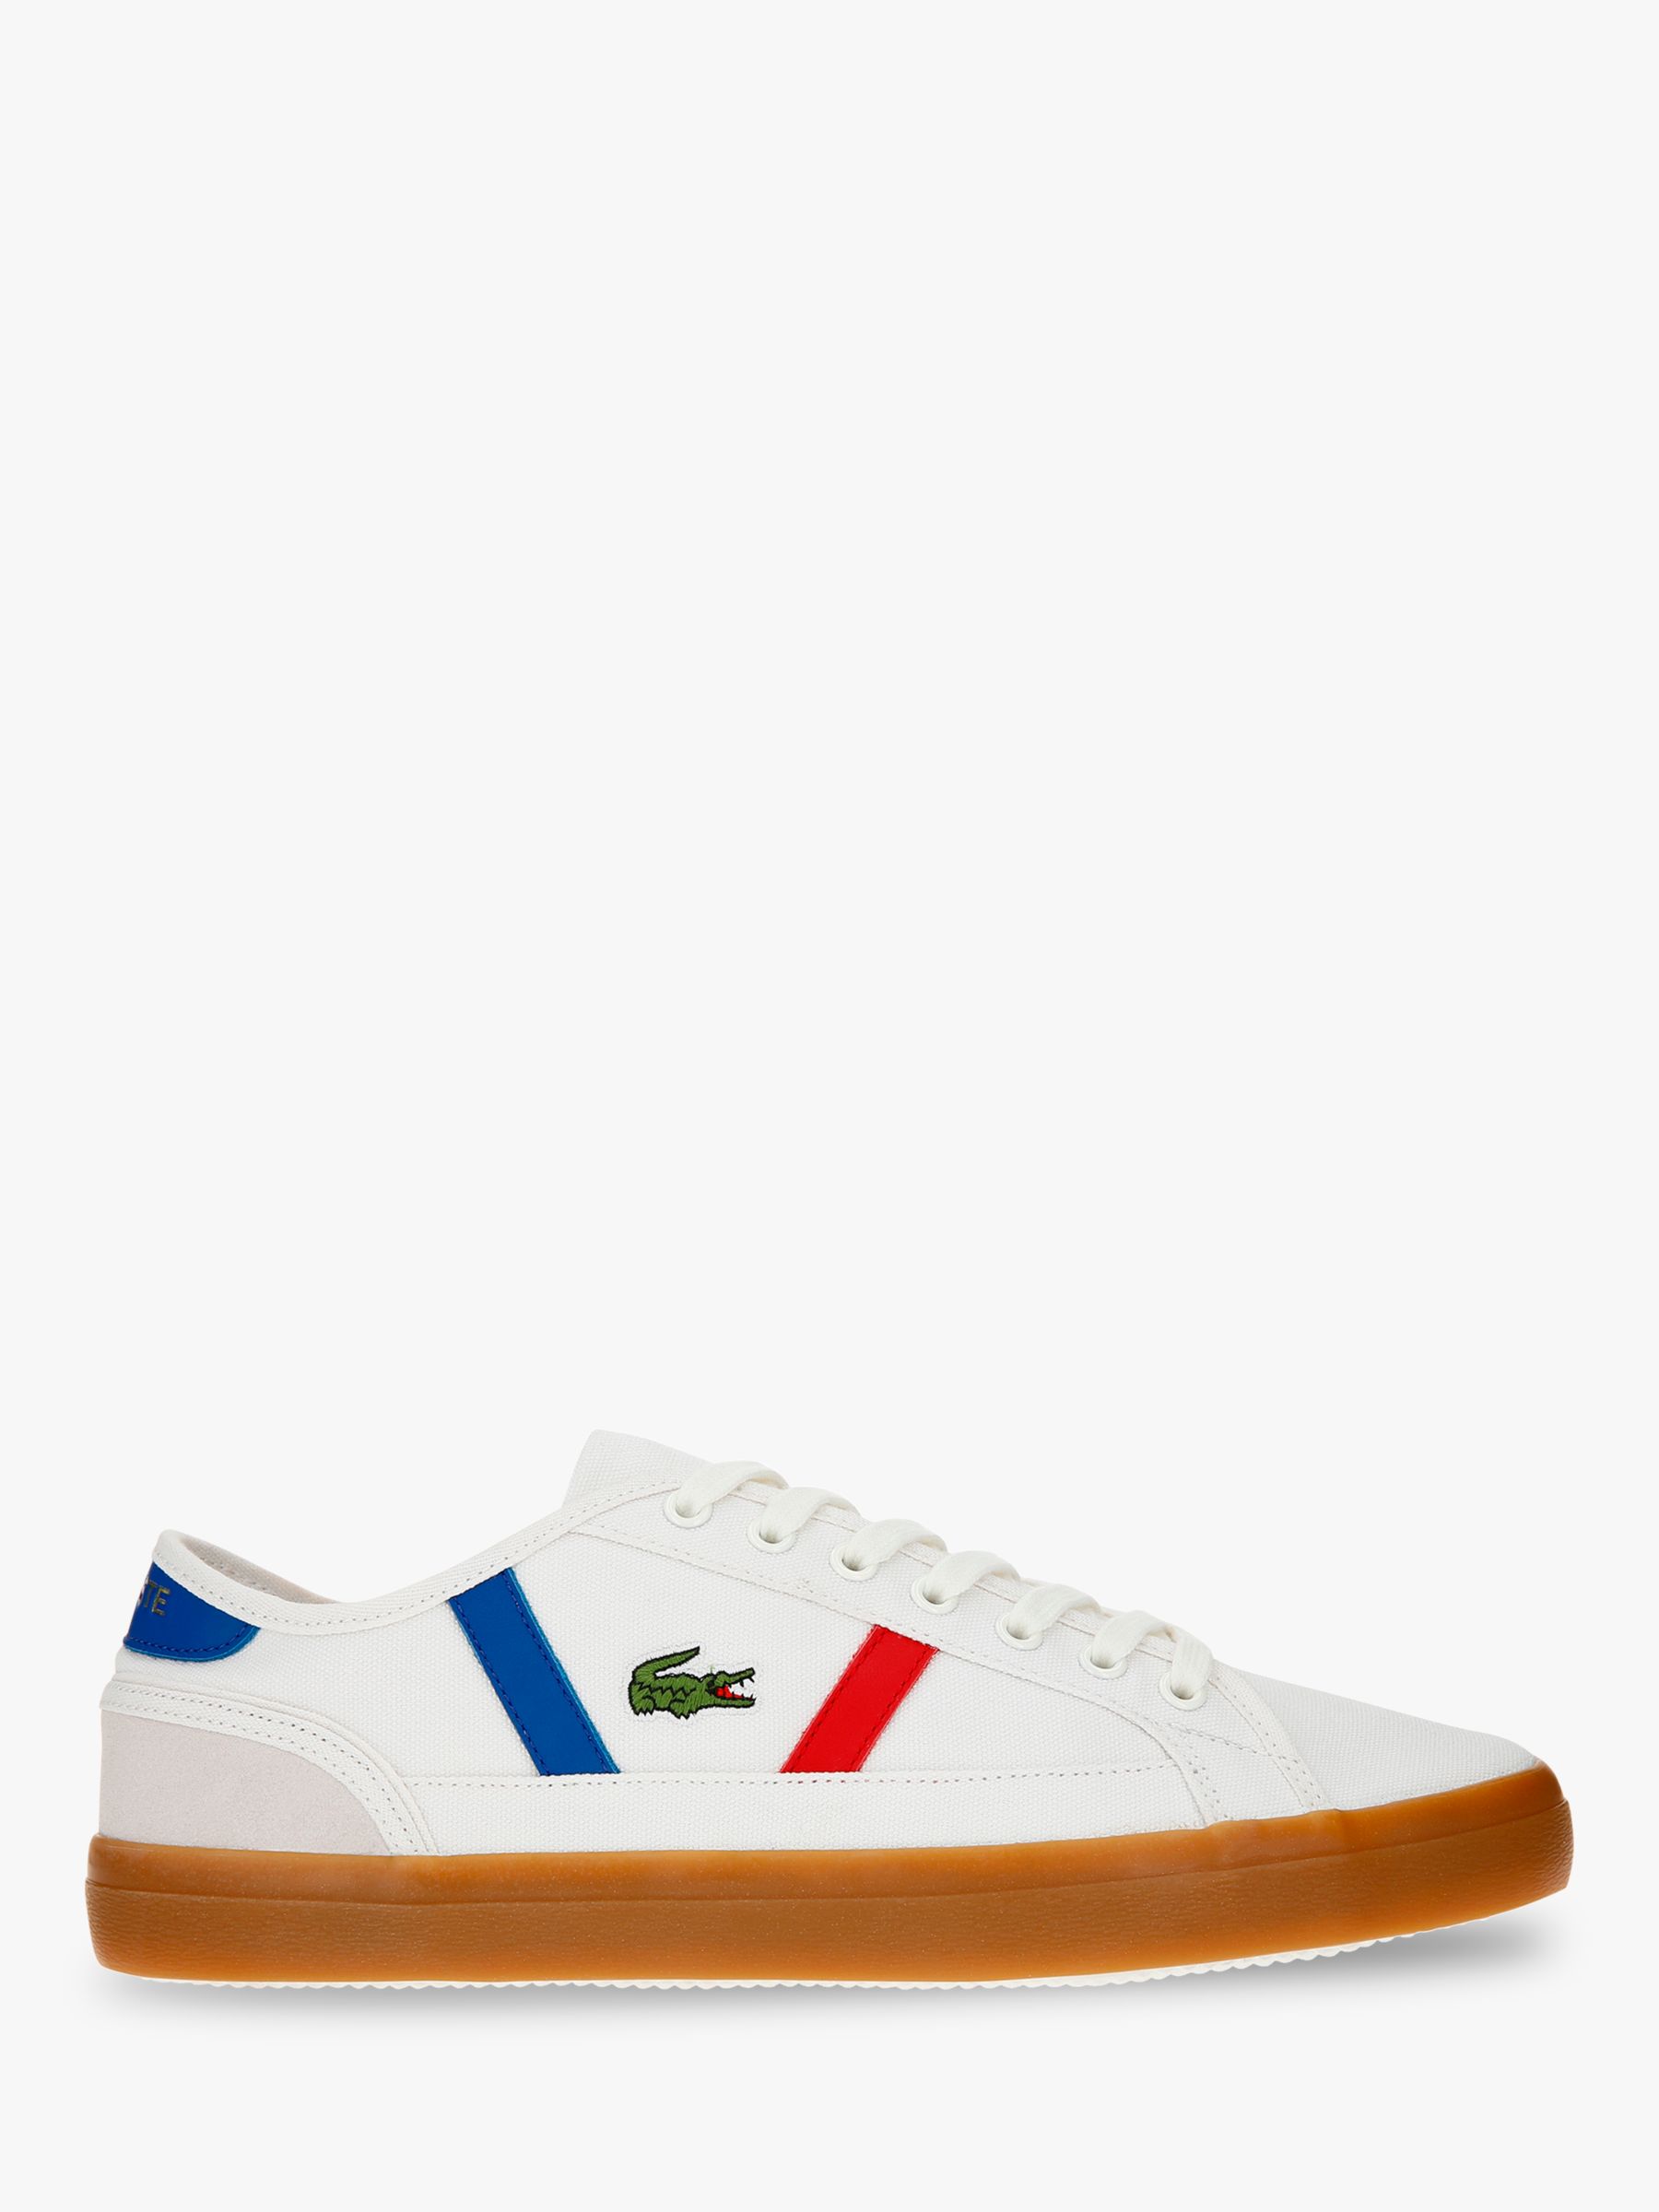 Lacoste Sideline Trainers | White/Red 